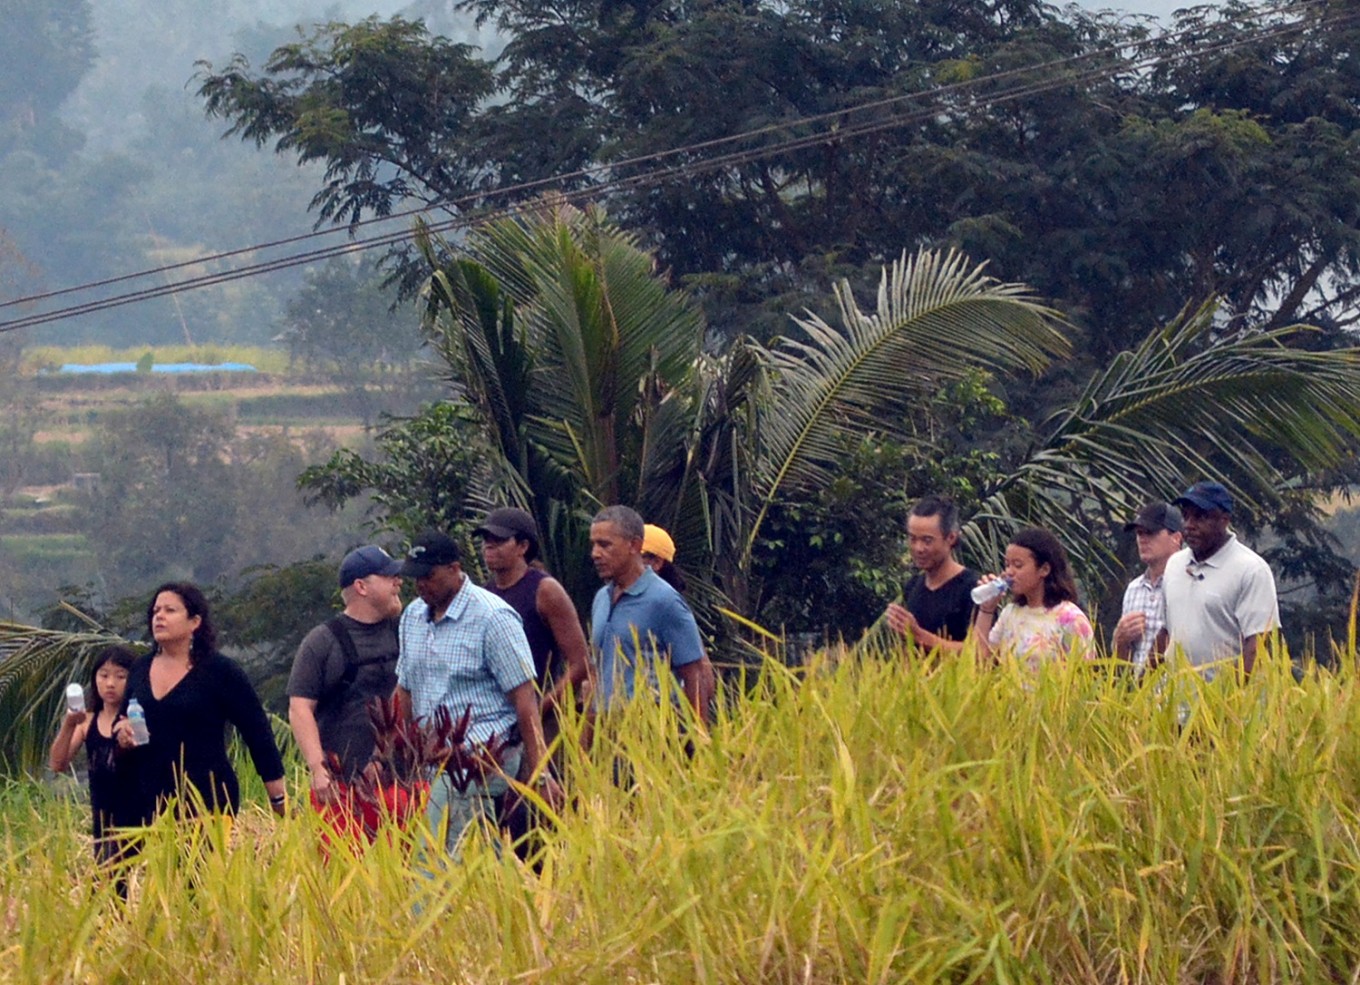 Former US president Barack Obama (center) and his entourage take a break after a walk through the field while visiting the Jatiluwih tourist site in Tabanan on Bali island on June 25. Image: AFP/STR